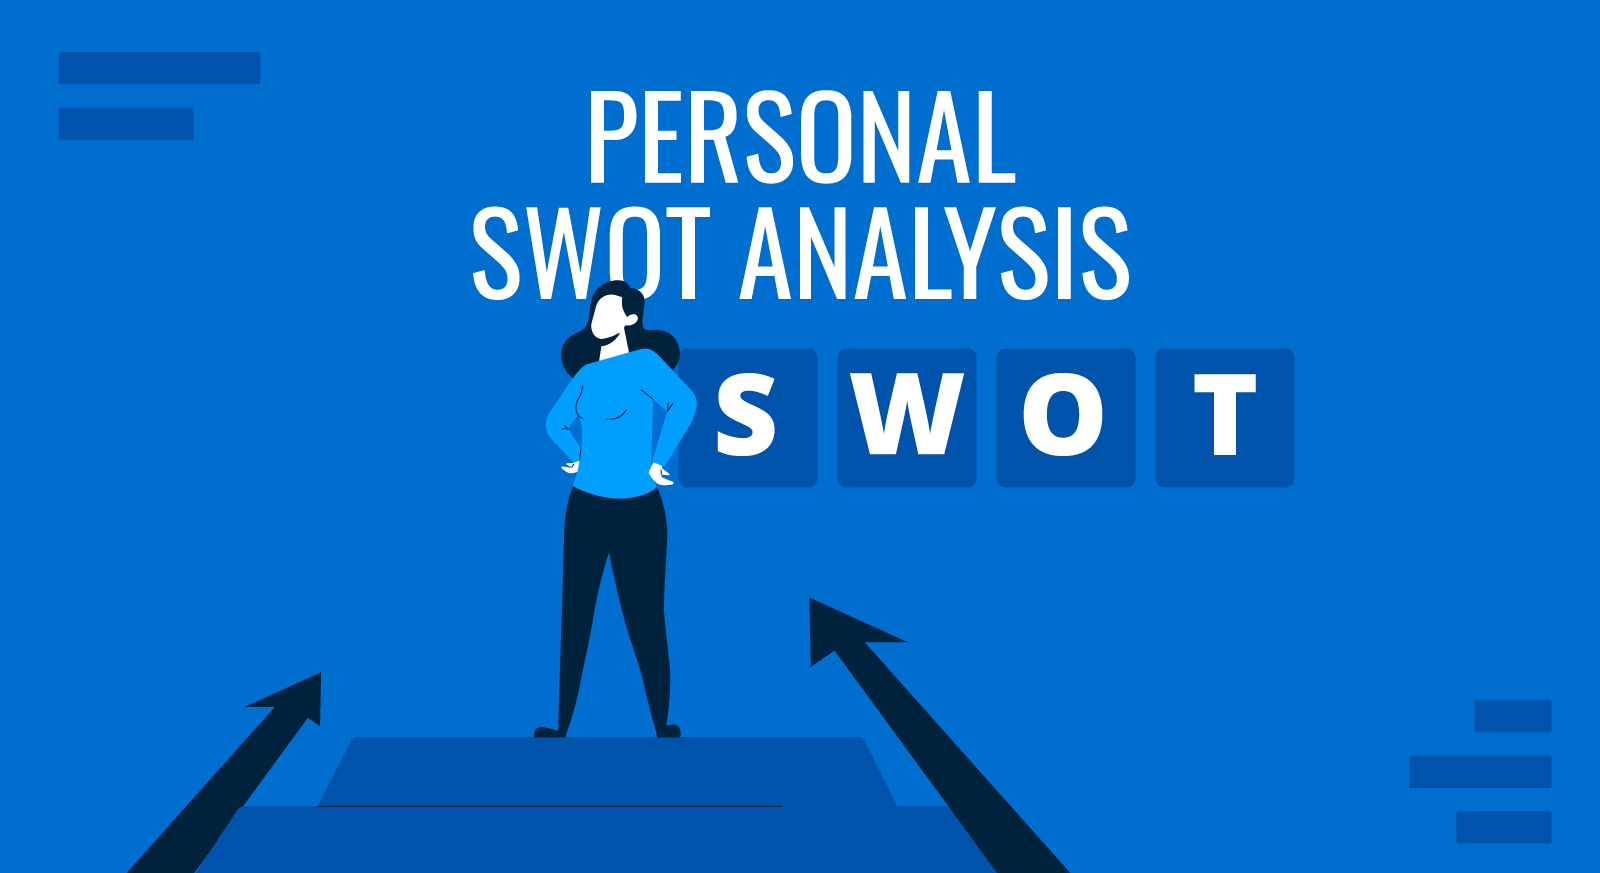 Personal SWOT Analysis: Quick Guide (with Examples)